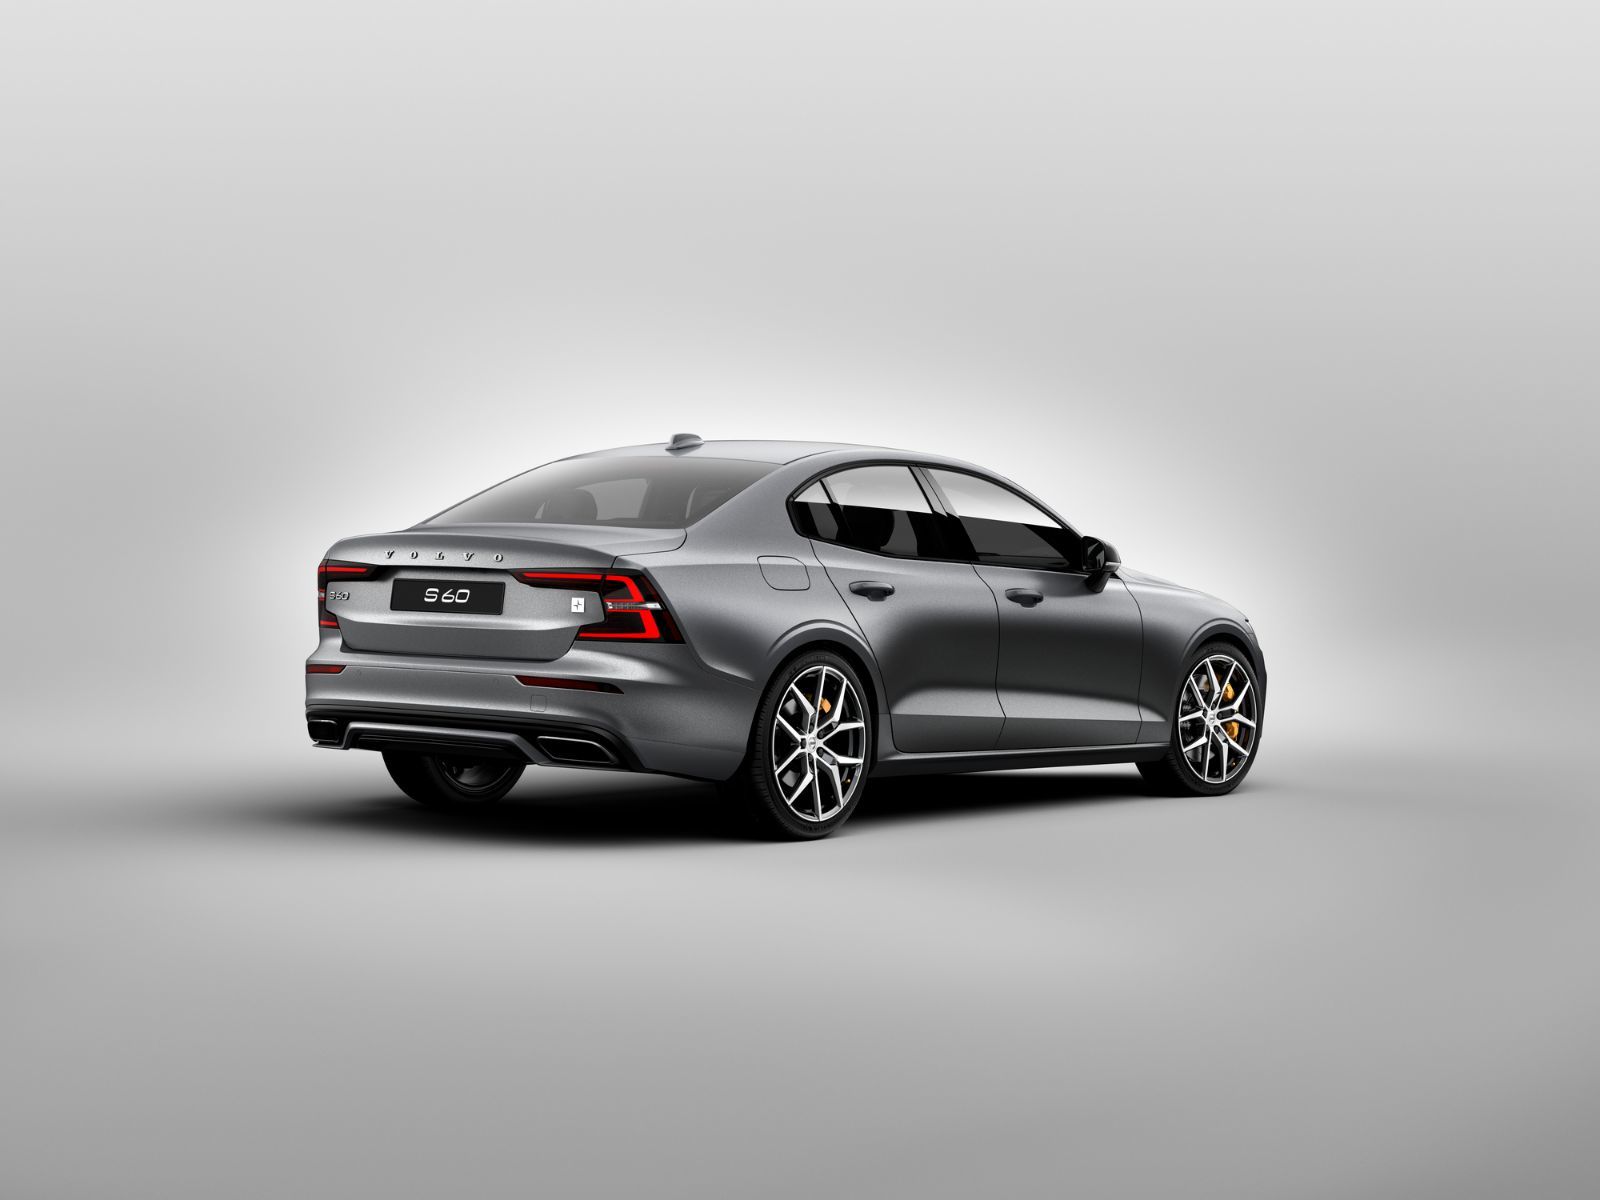 Safety and Performance Come First in the 2019 Volvo S60